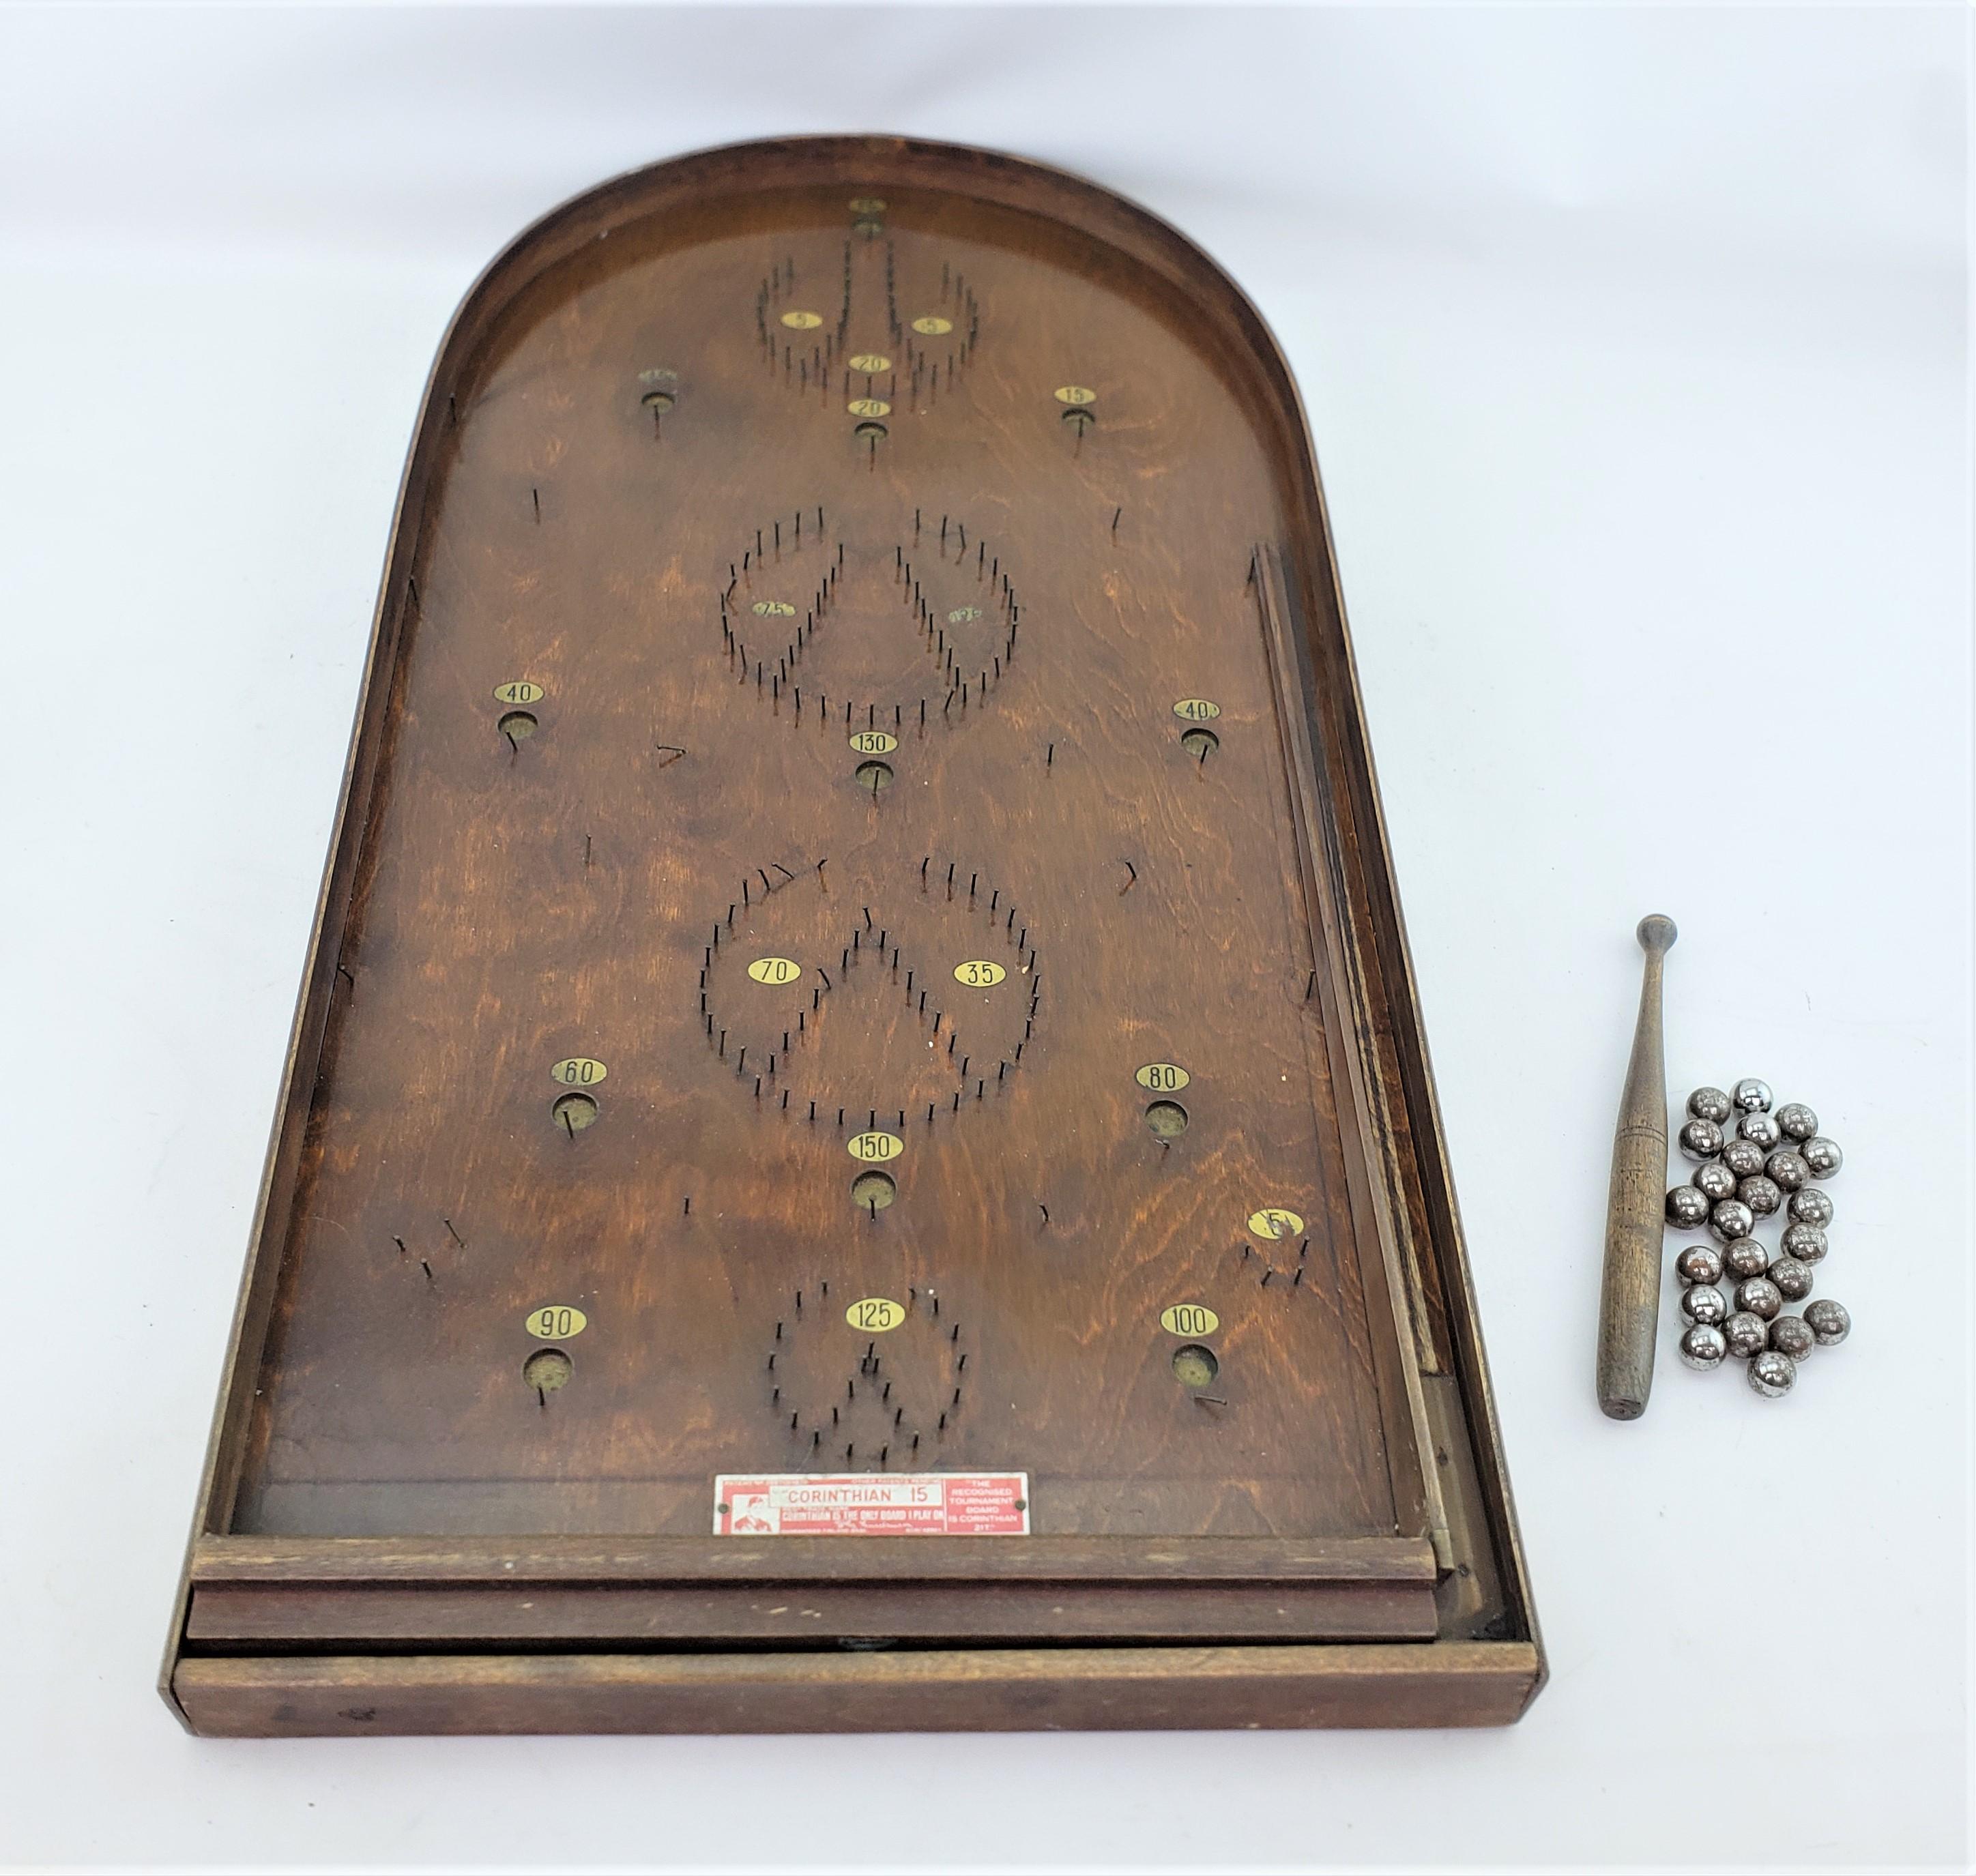 This antique bagatelle game set was made by the Corinthian Company of Finland in approximately 1920 and done in the period Art Deco style. The game board and bat are composed of walnut with a plywood base and bentwood surround. The set comes with